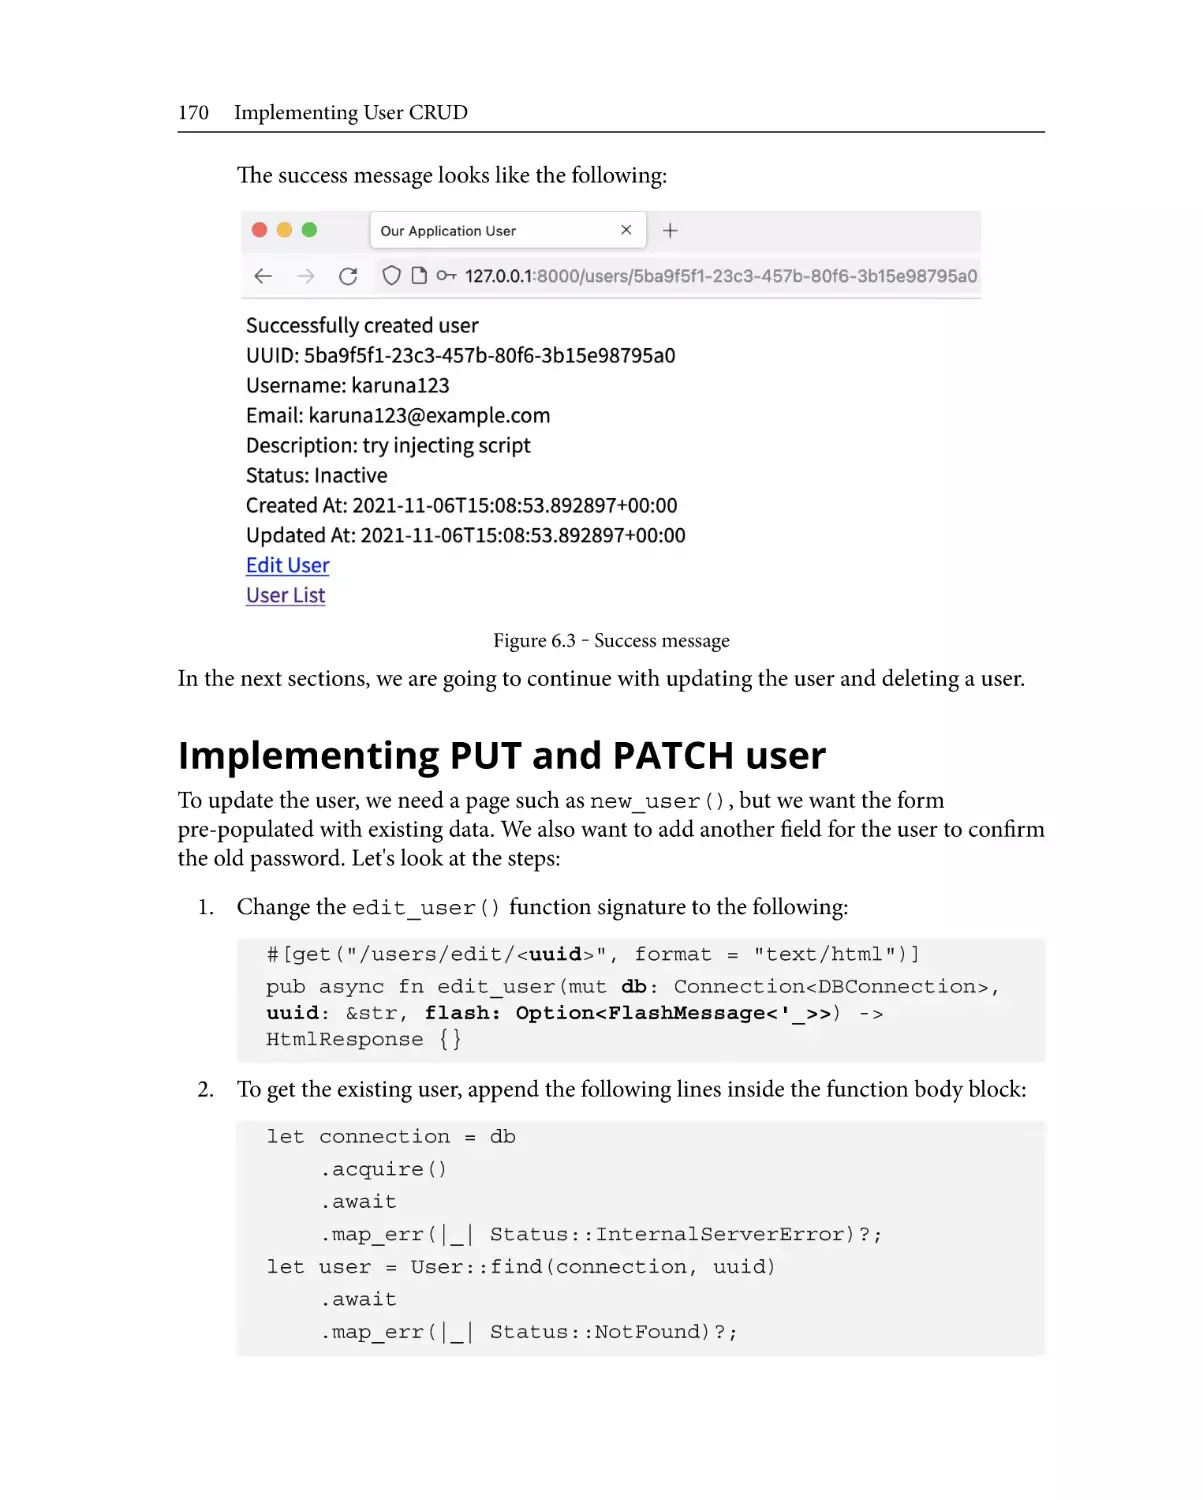 Implementing PUT and PATCH user